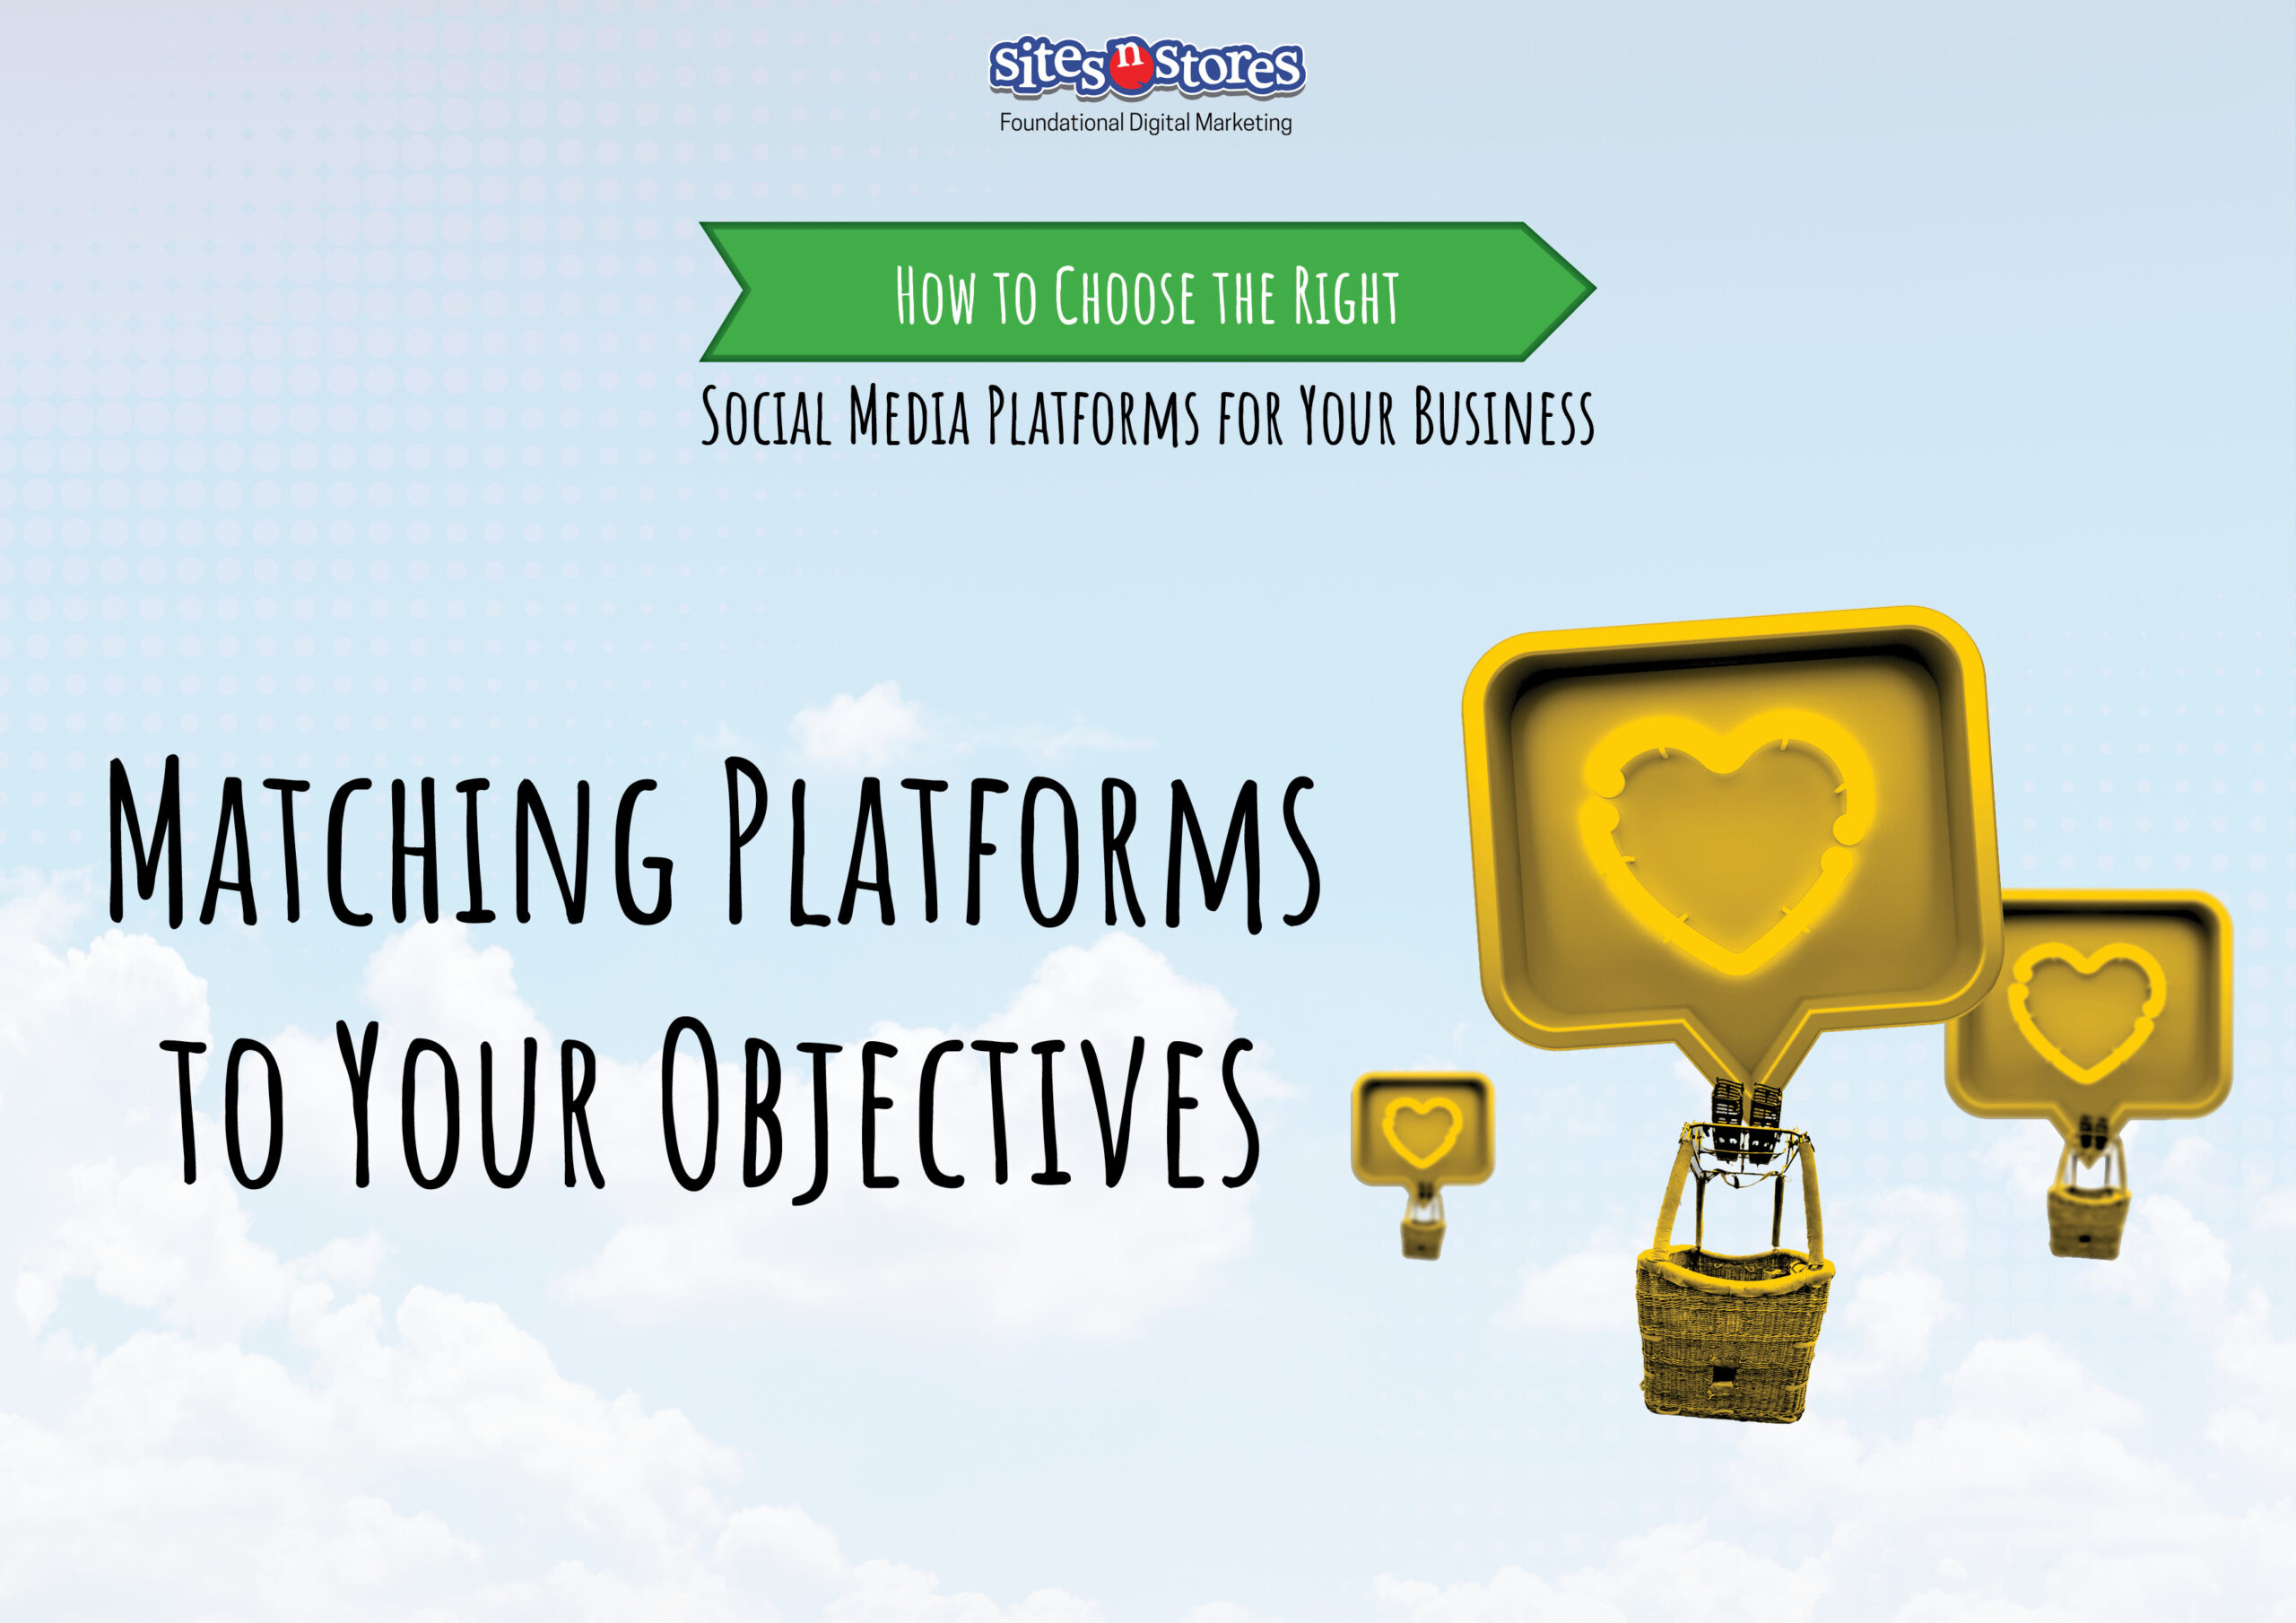 Matching Platforms to Your Objectives